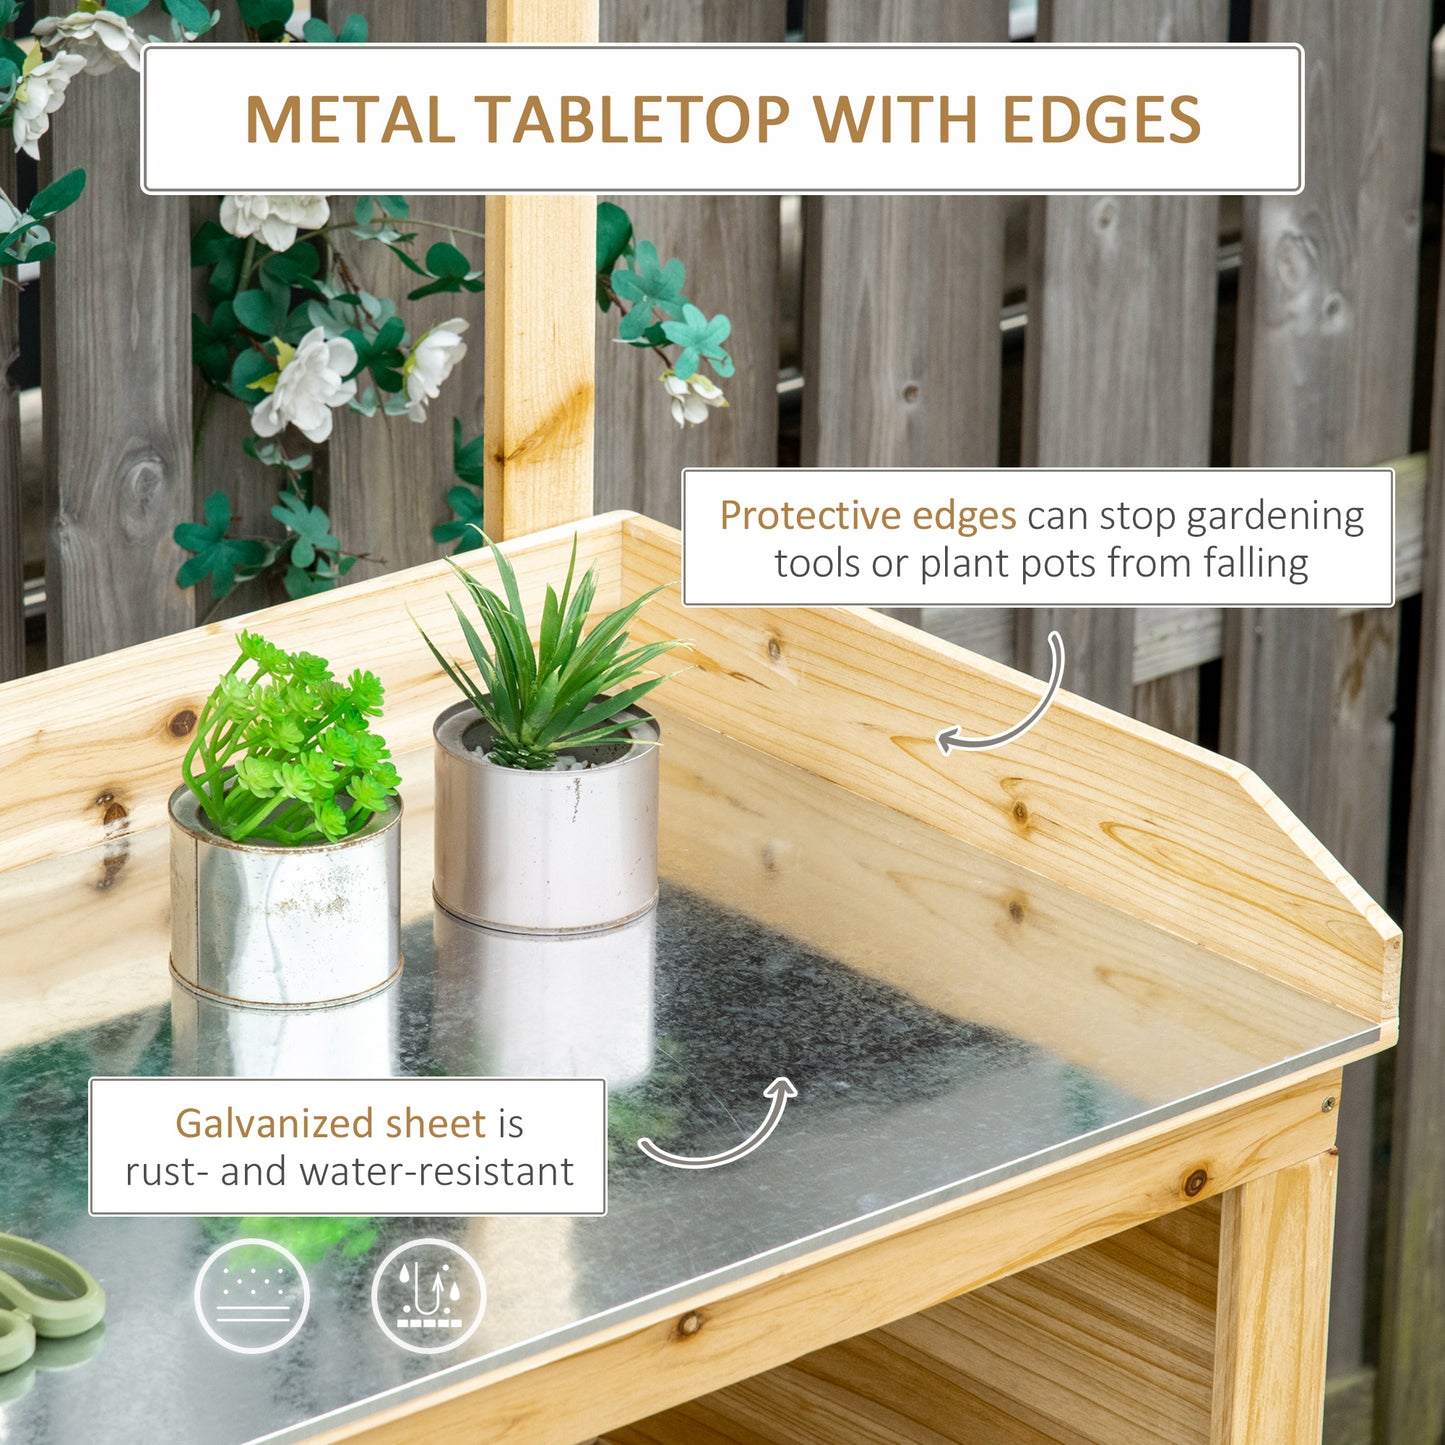 Outsunny Garden Potting Bench Table, Wooden Workstation Bench w/ Galvanized Metal Tabletop, Storage Shelves and Hooks, Natural